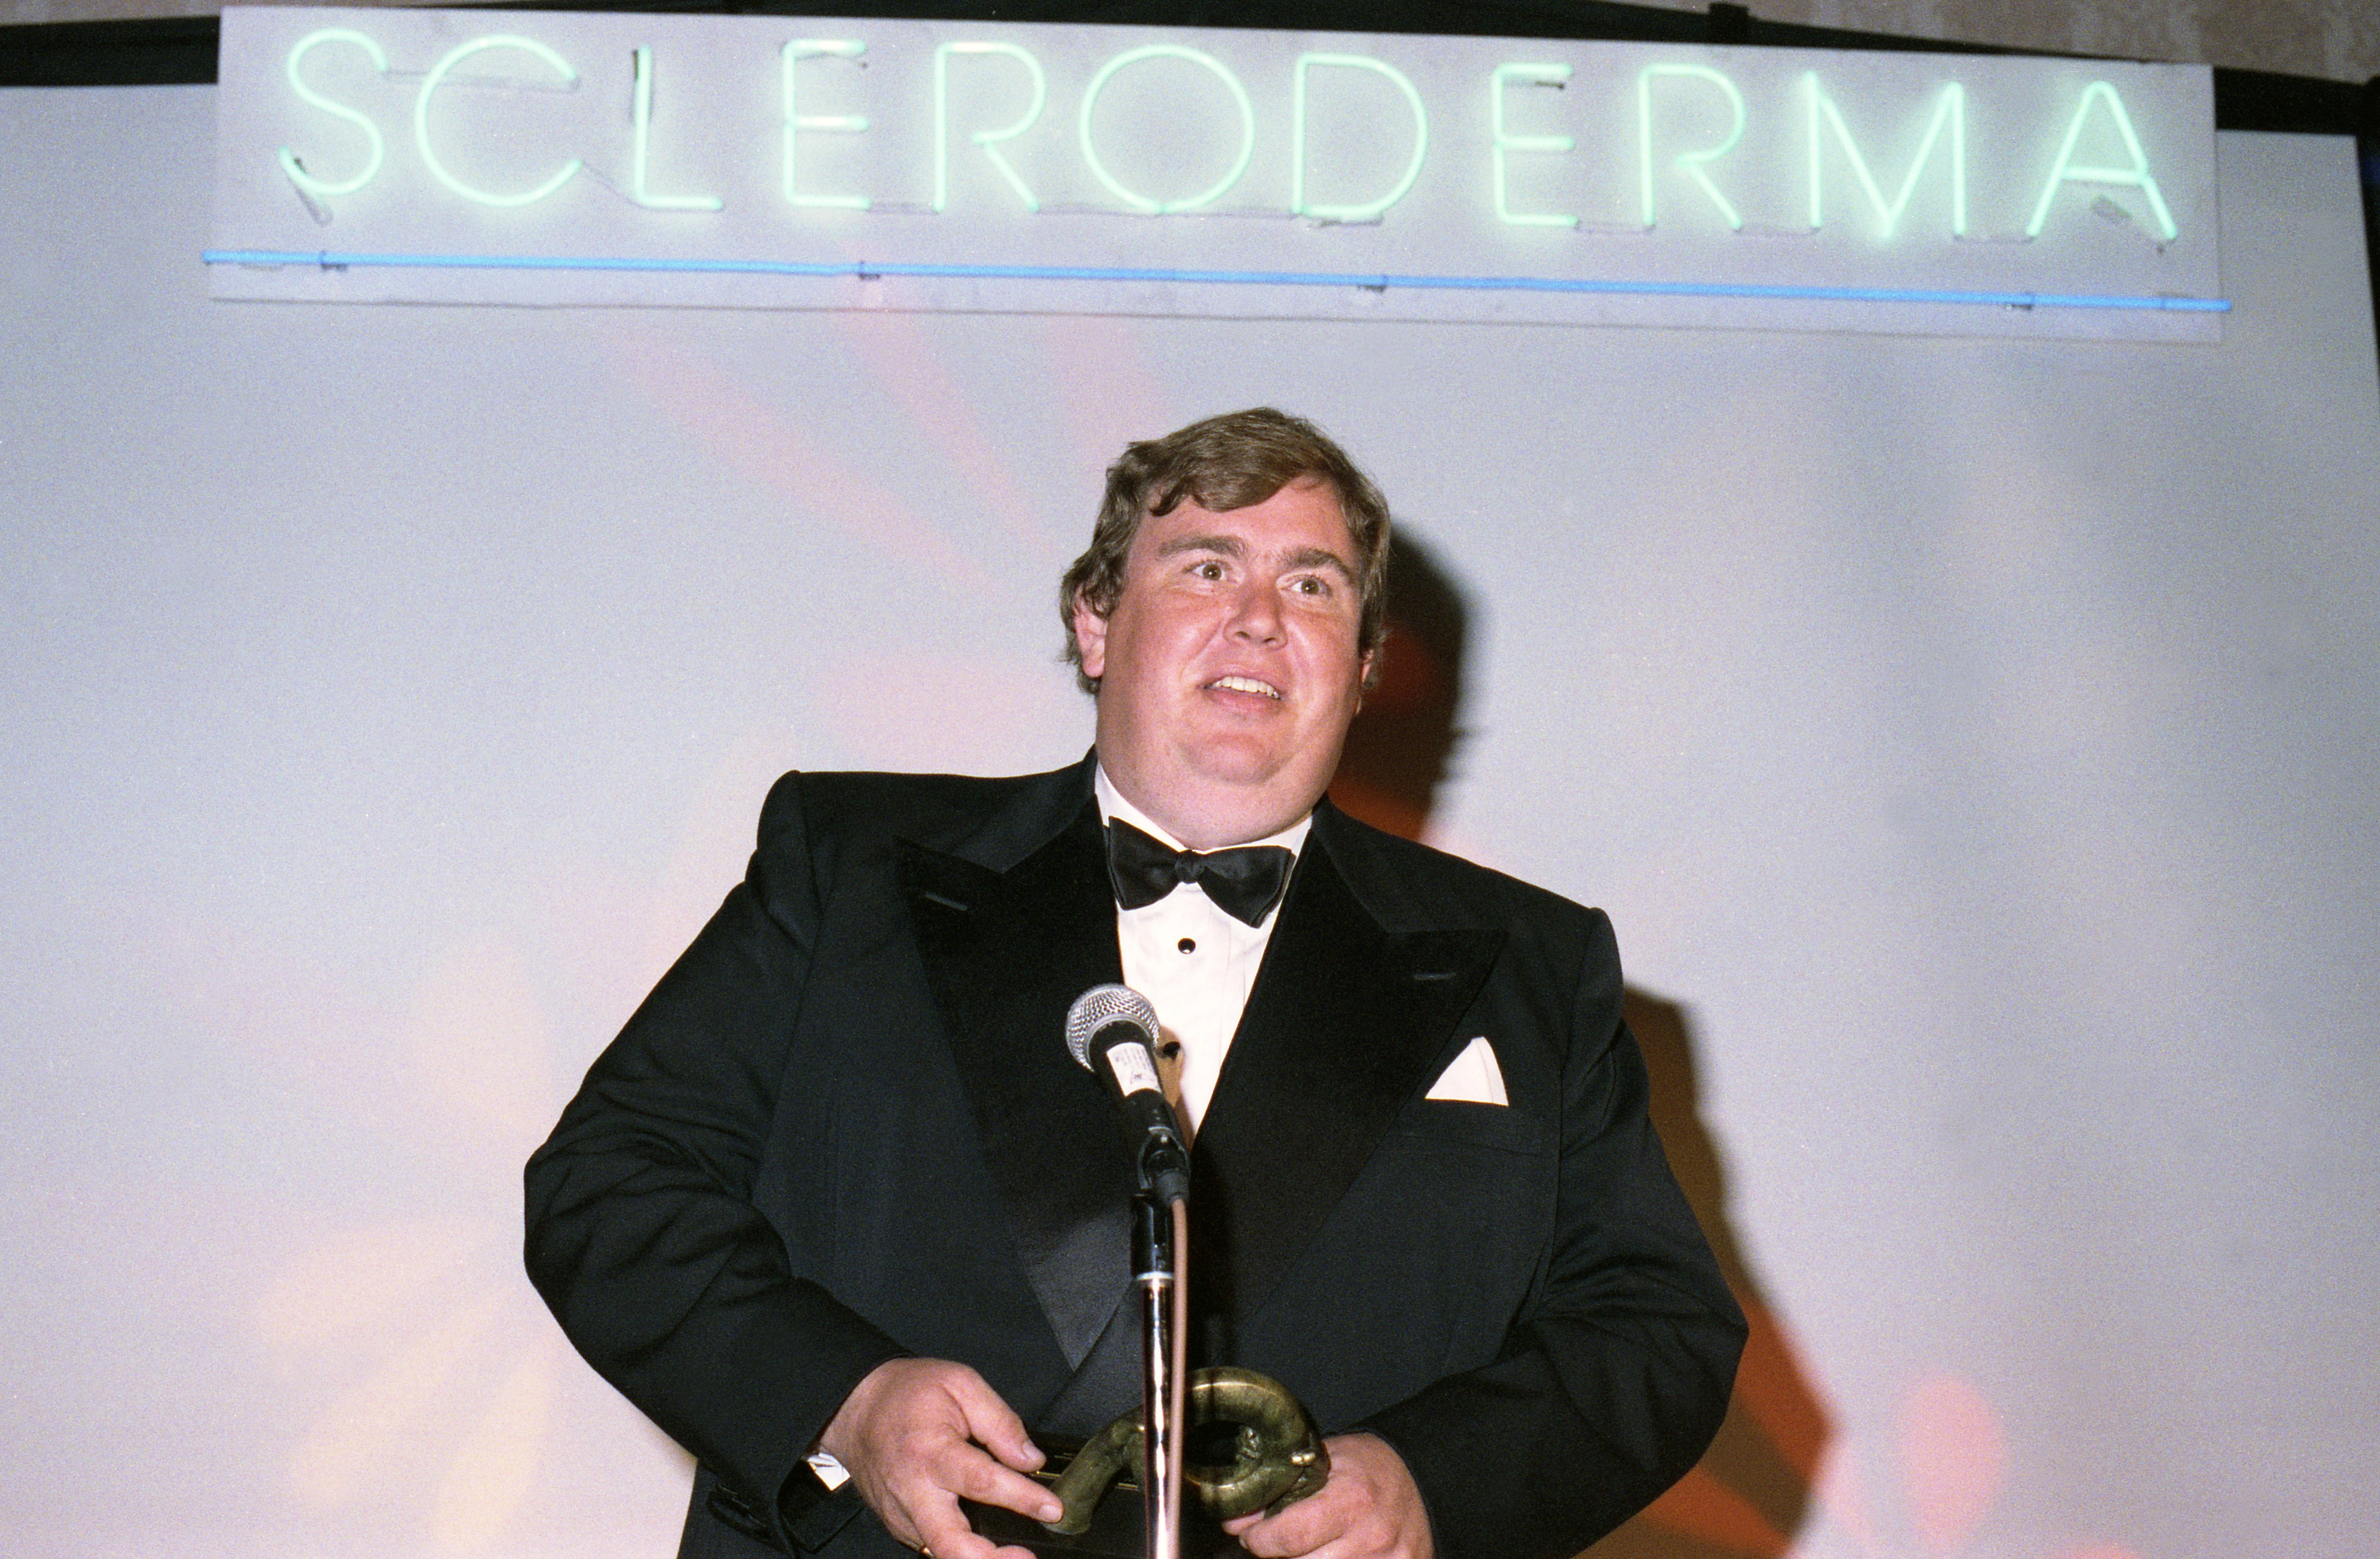 John Candy receiving the Founders Award from the Scleroderma Research Foundation on June 9, 1991, in Santa Monica, California. | Source: Getty Images